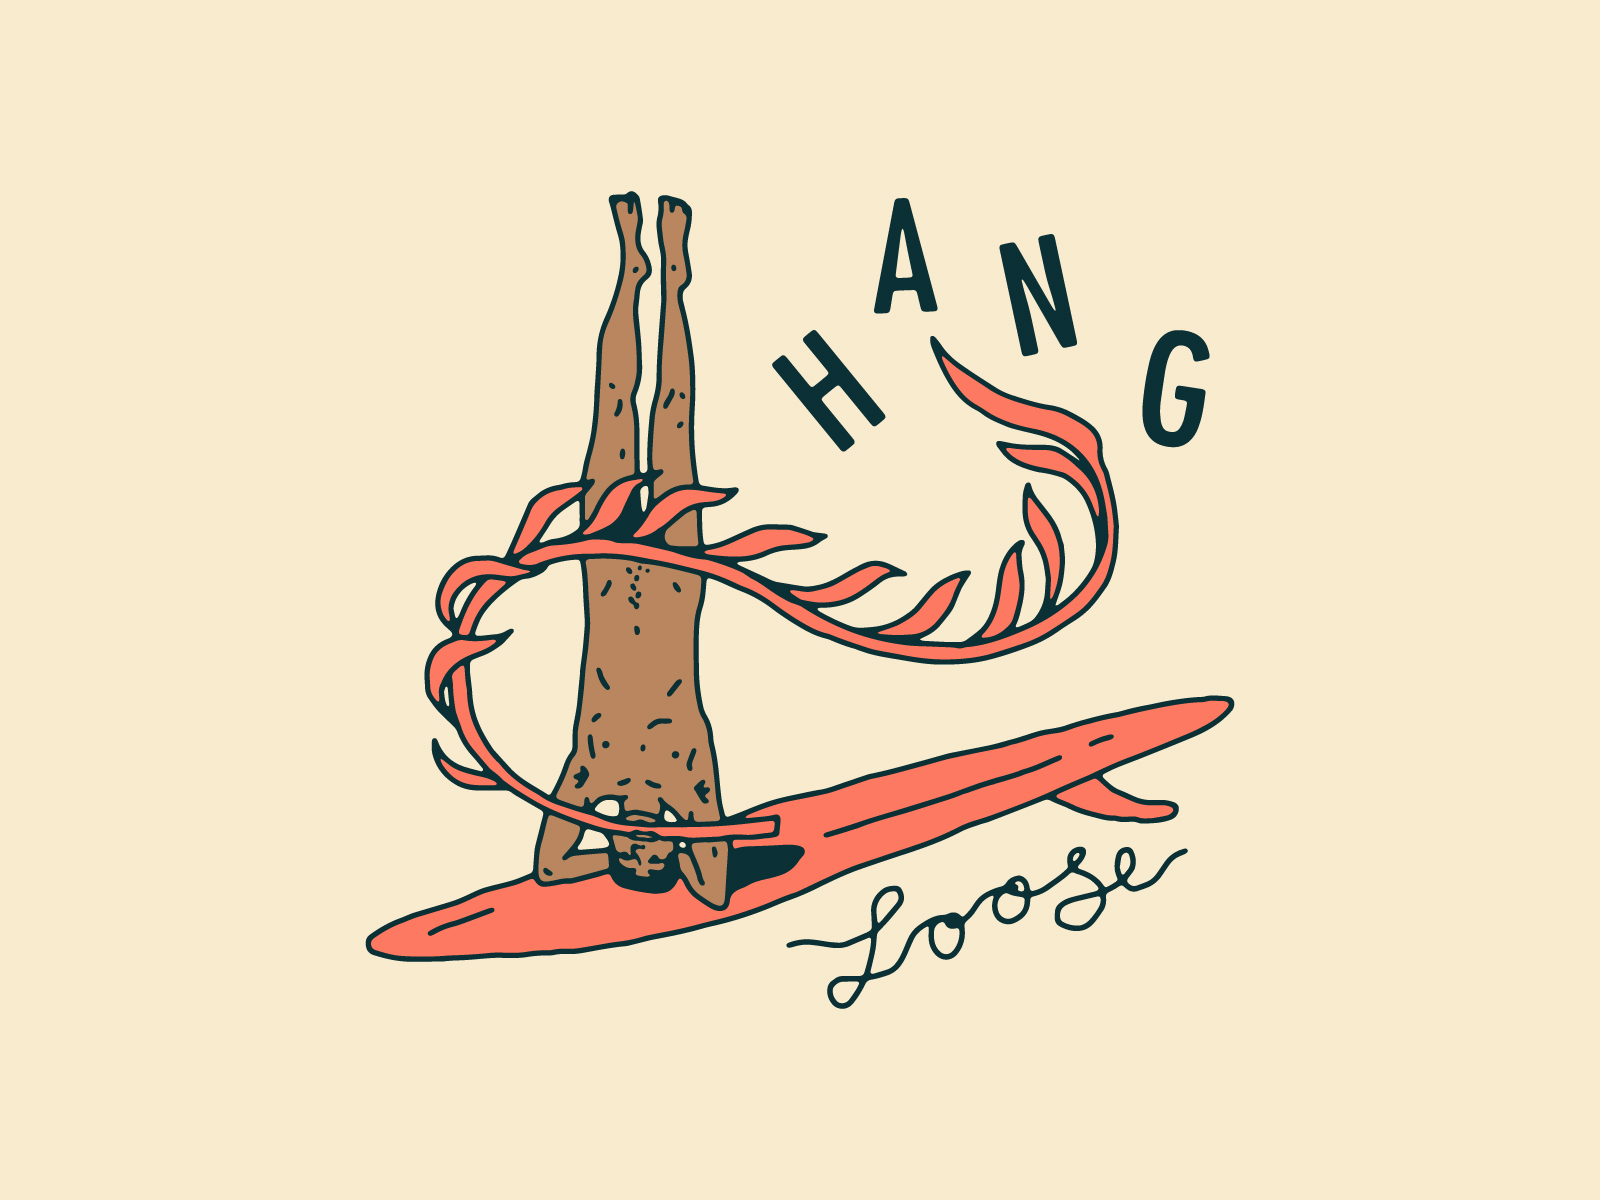 Hang Loose by Kylie Sky Souza for Commence Studio on Dribbble